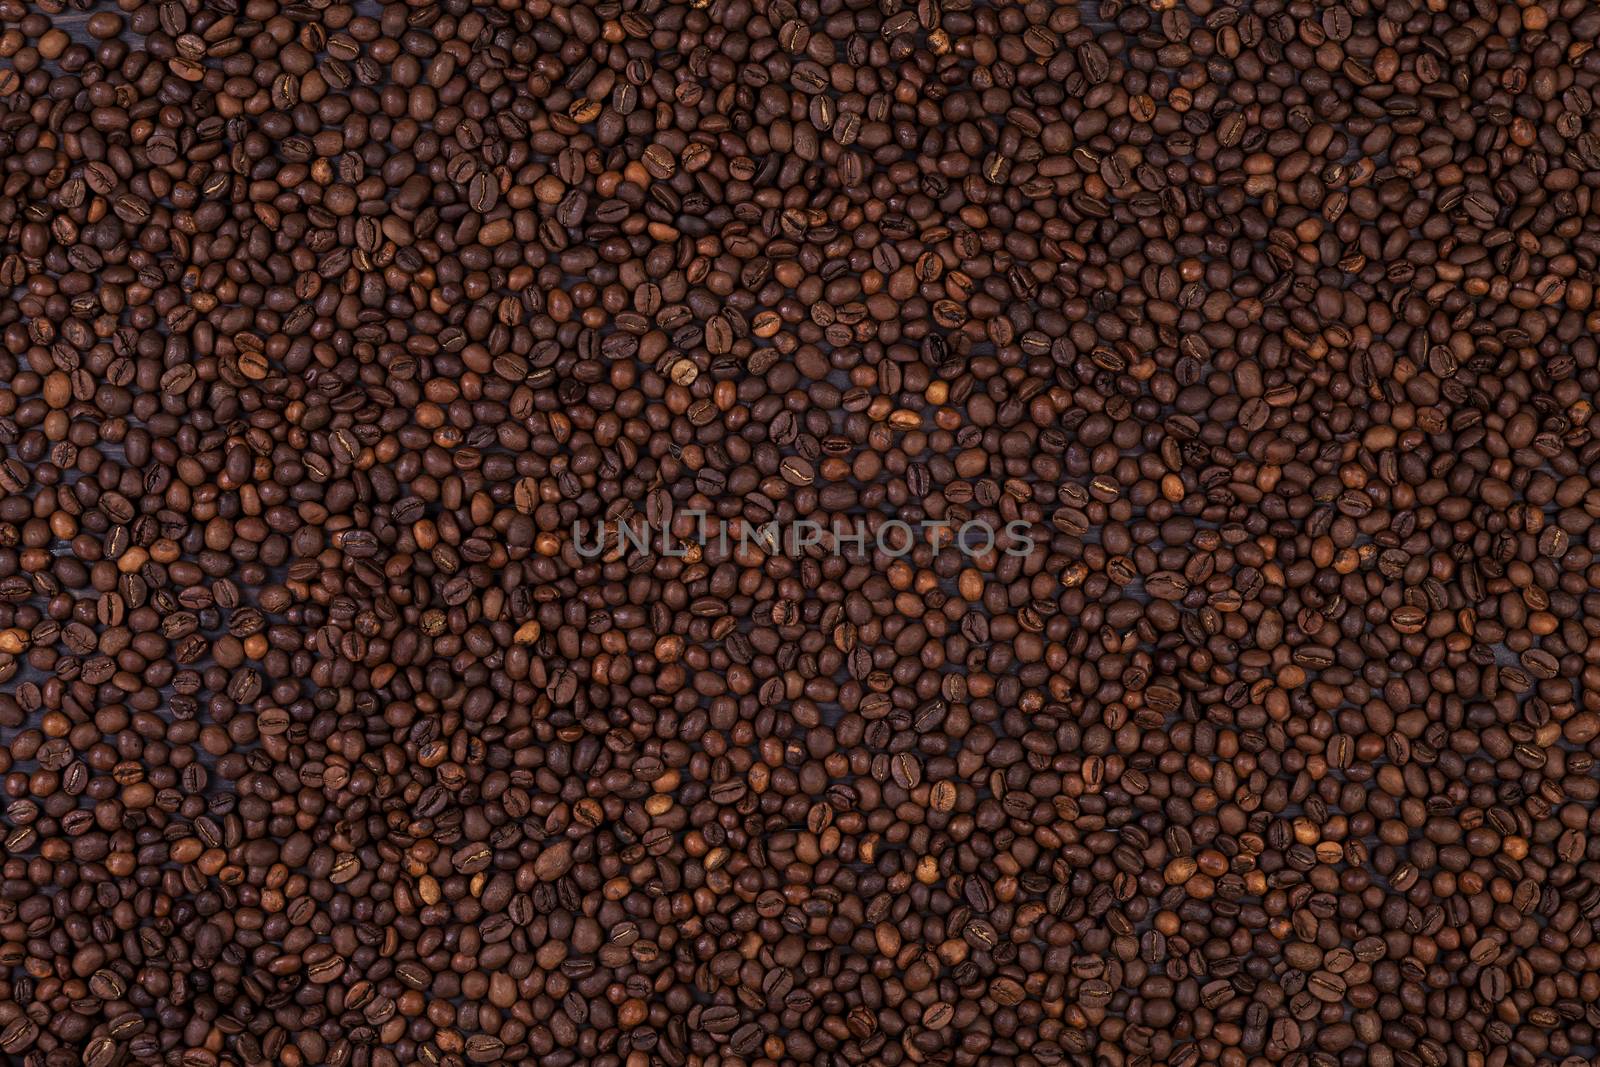 Coffee beans background, coffee texture, top view by xamtiw